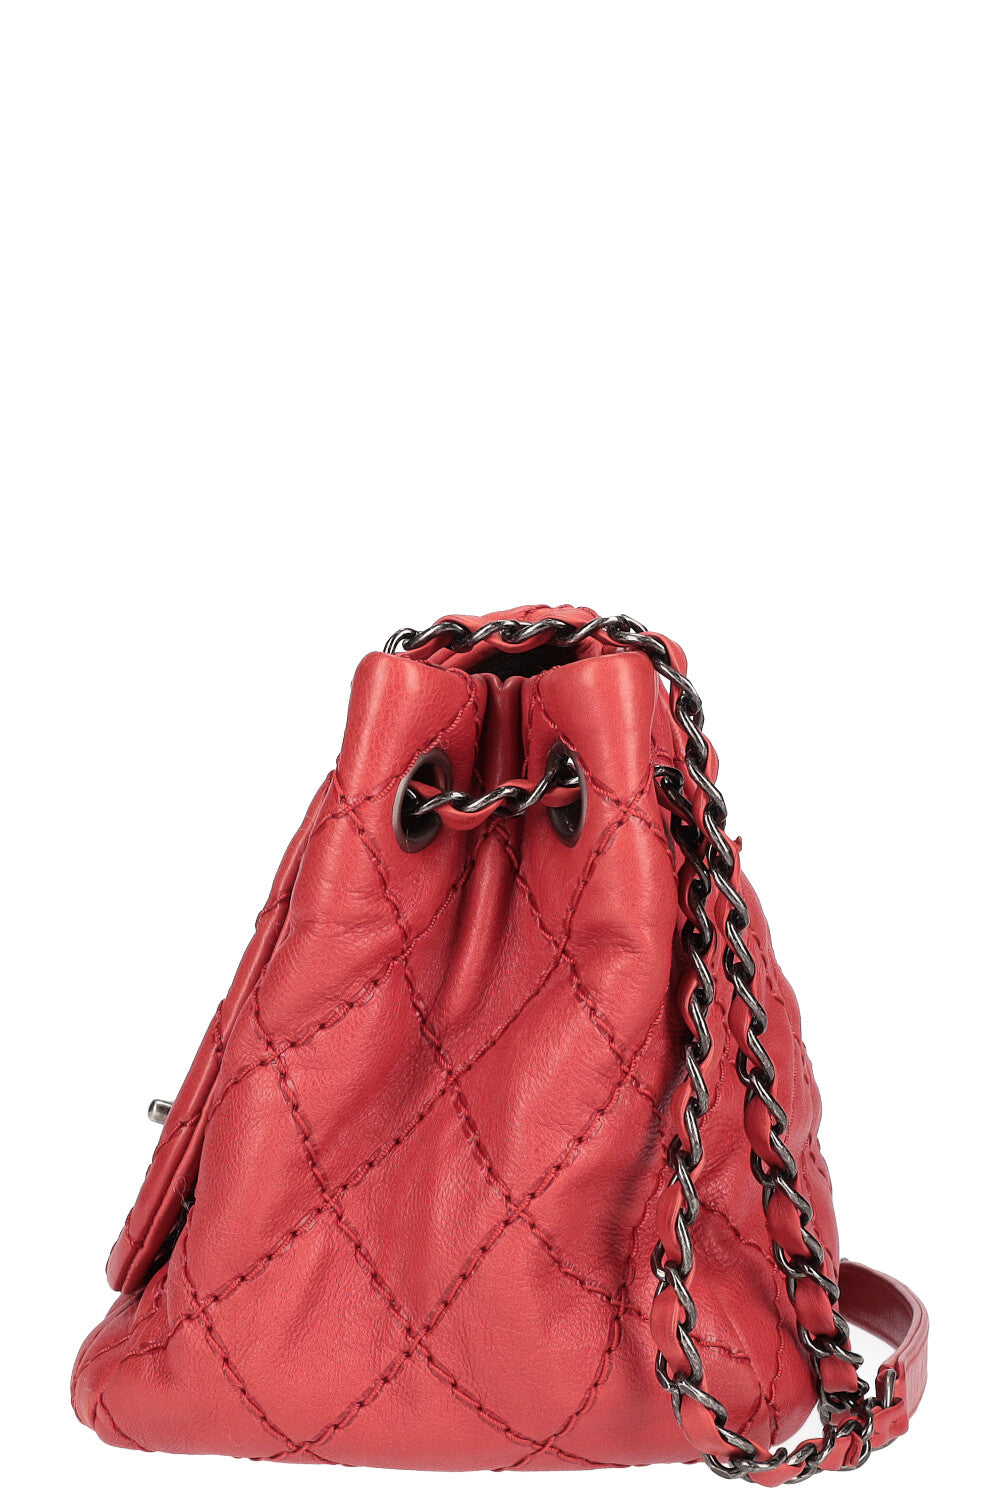 CHANEL Quilted Bag Leather Red